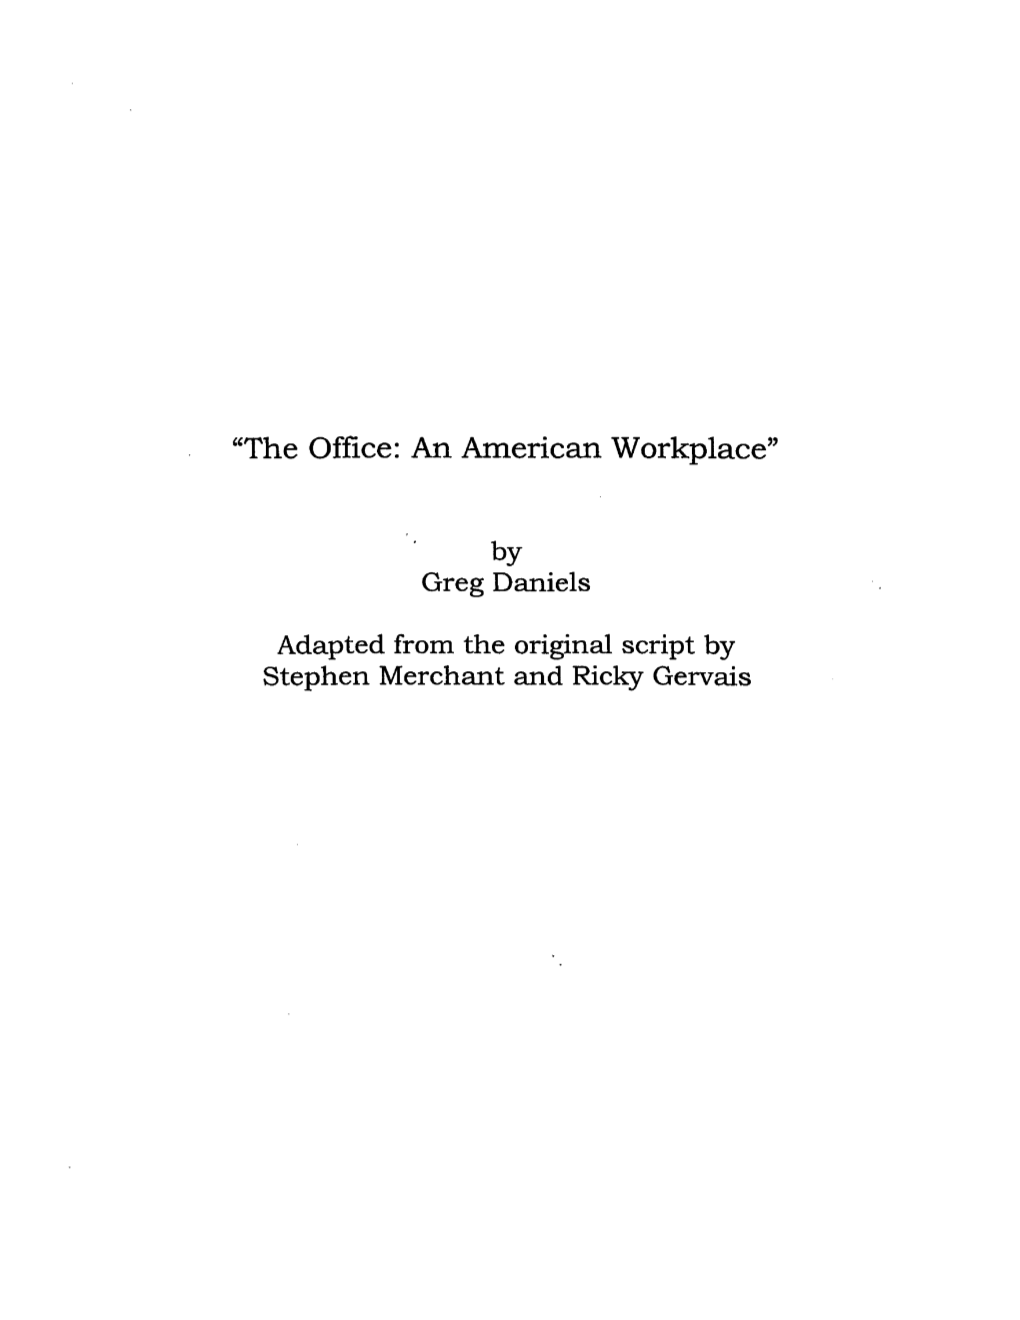 "The Office: an American Workplace" By